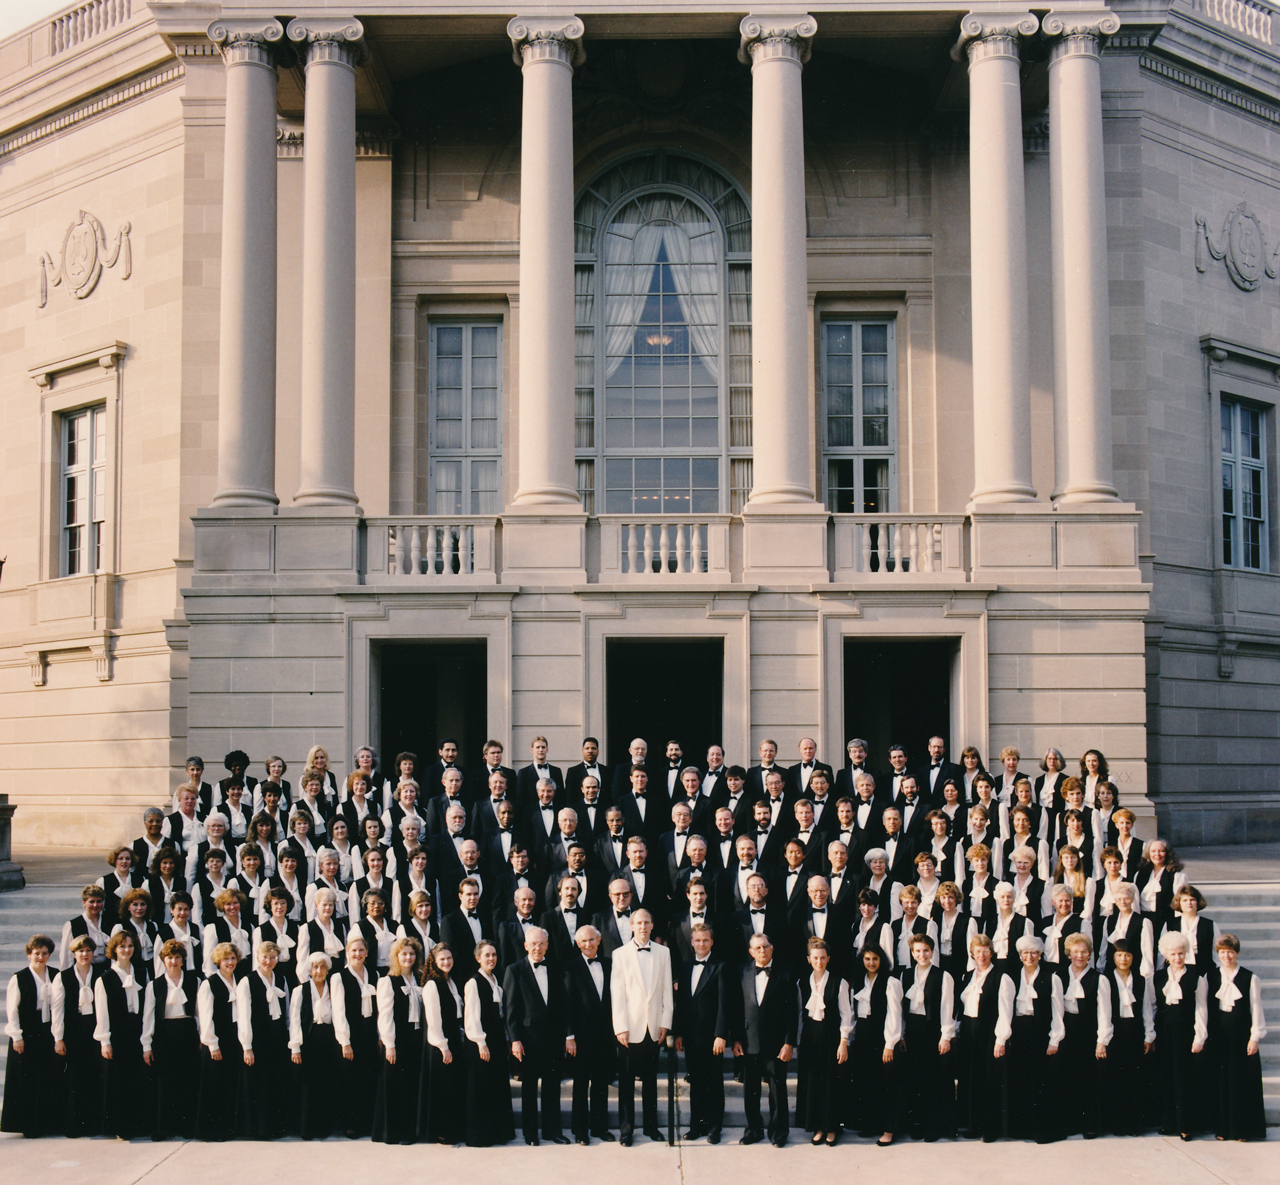 Morrell and the Cleveland Orchestra Chorus in 1991, posed in front of Severance